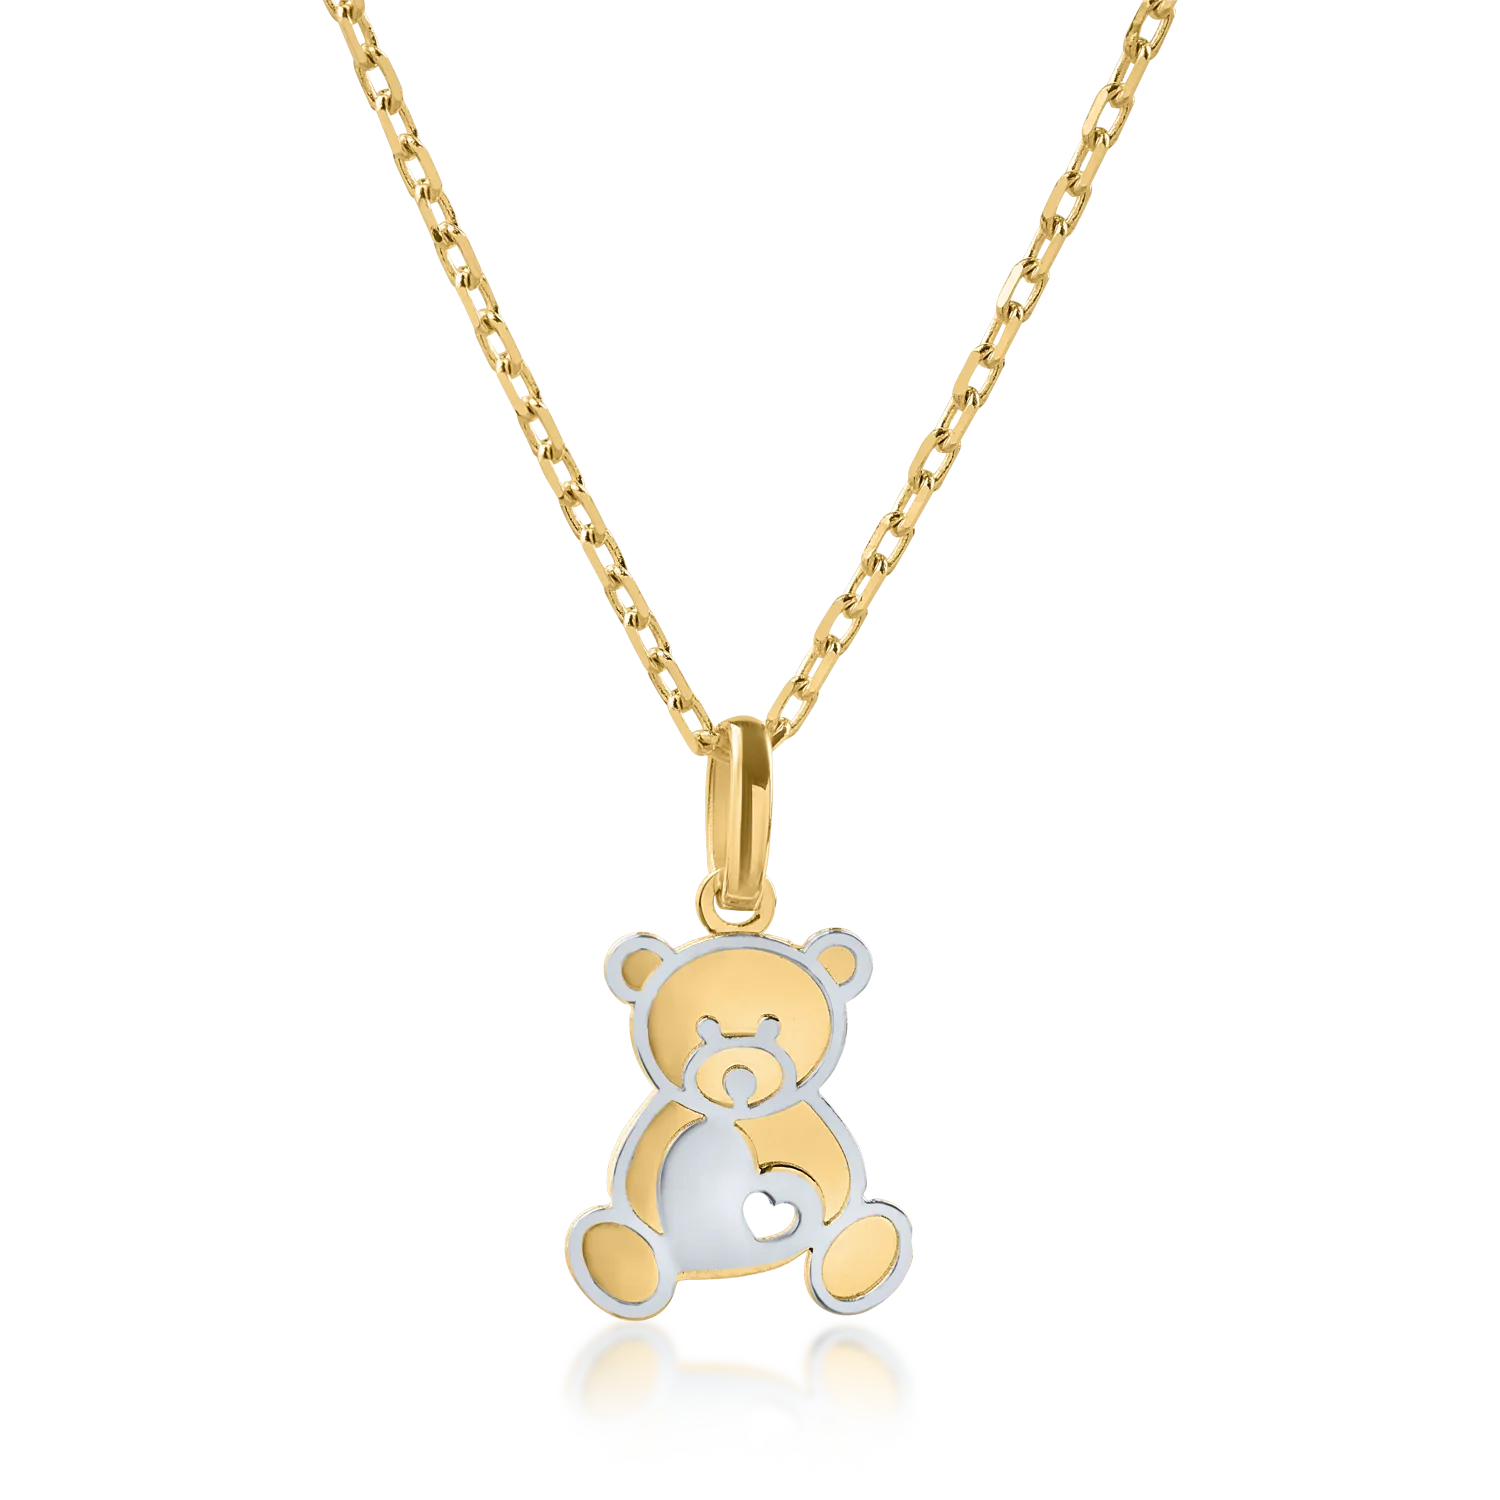 White-yellow gold teddy bear pendant necklace